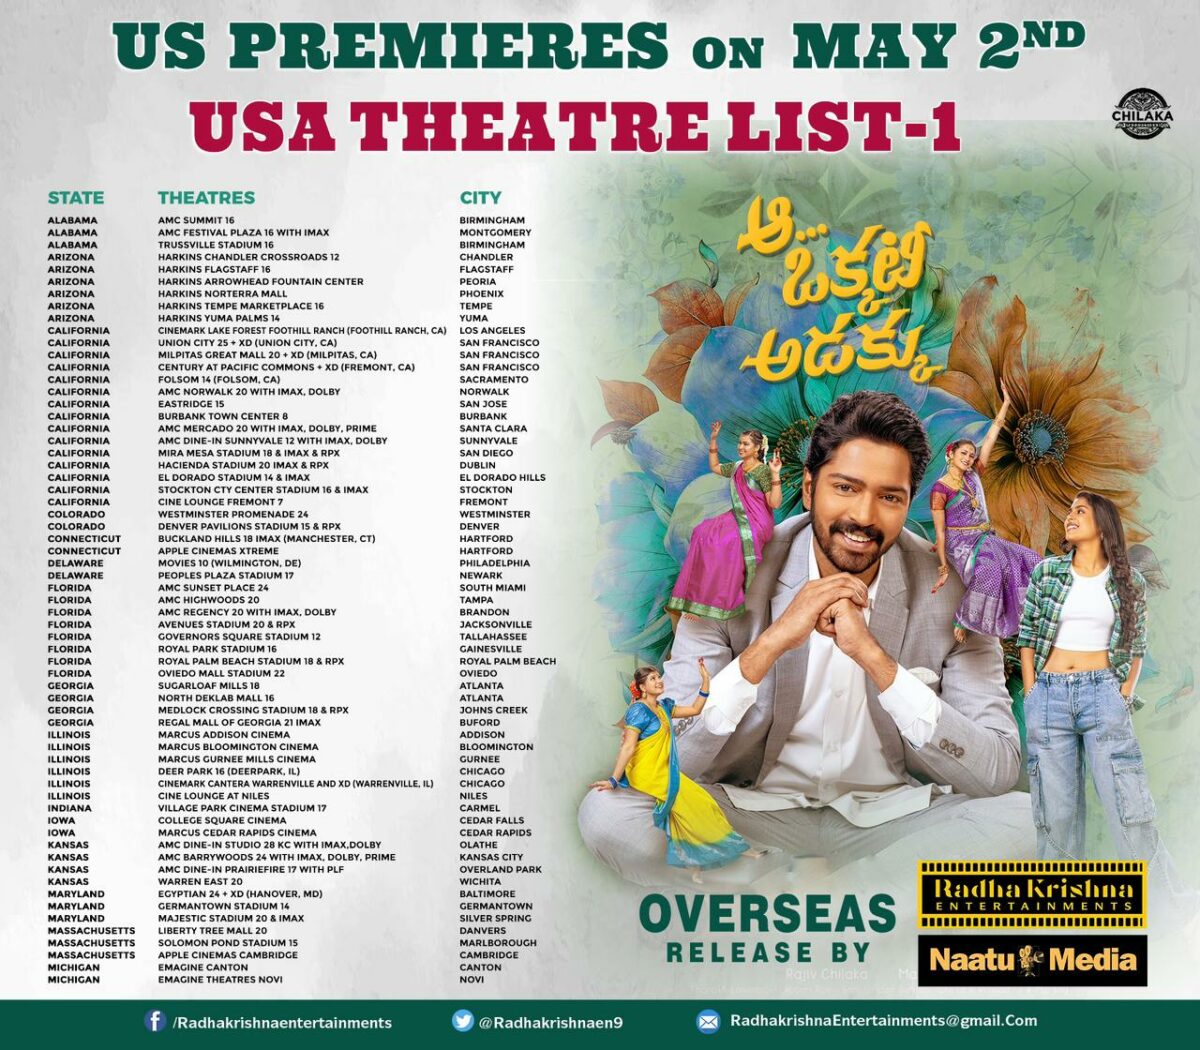 Here Is The List Of Theatres For Usa Premiere Shows Of Aa Okkati Adakku!